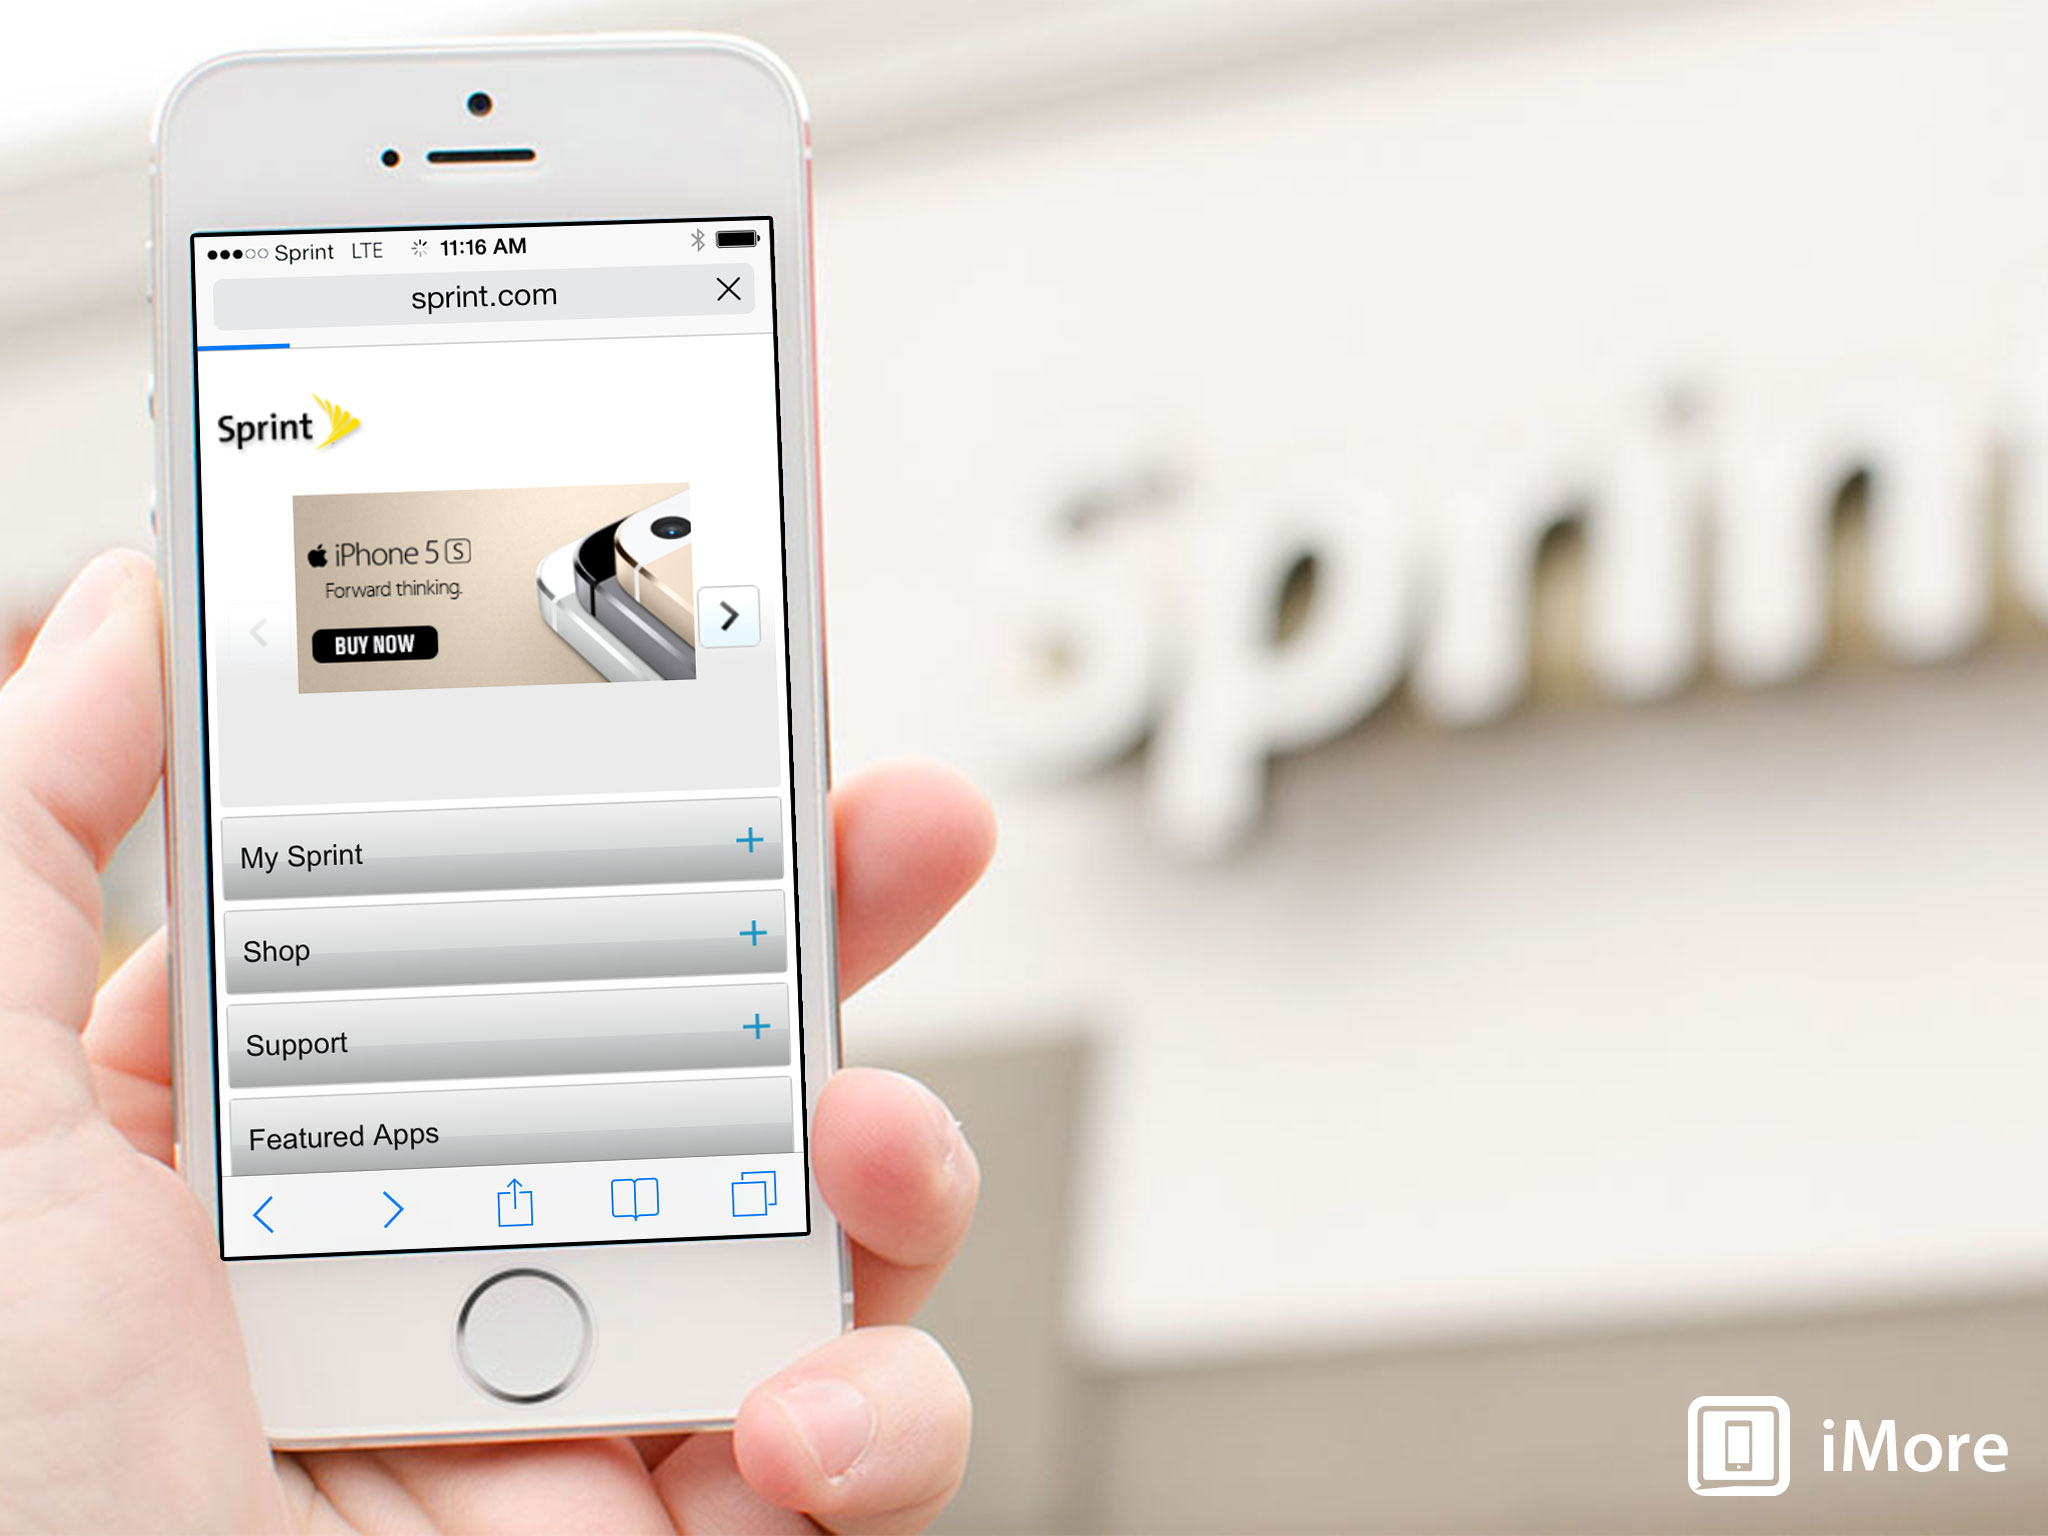 Sprint announces LTE service activation in 45 more cities